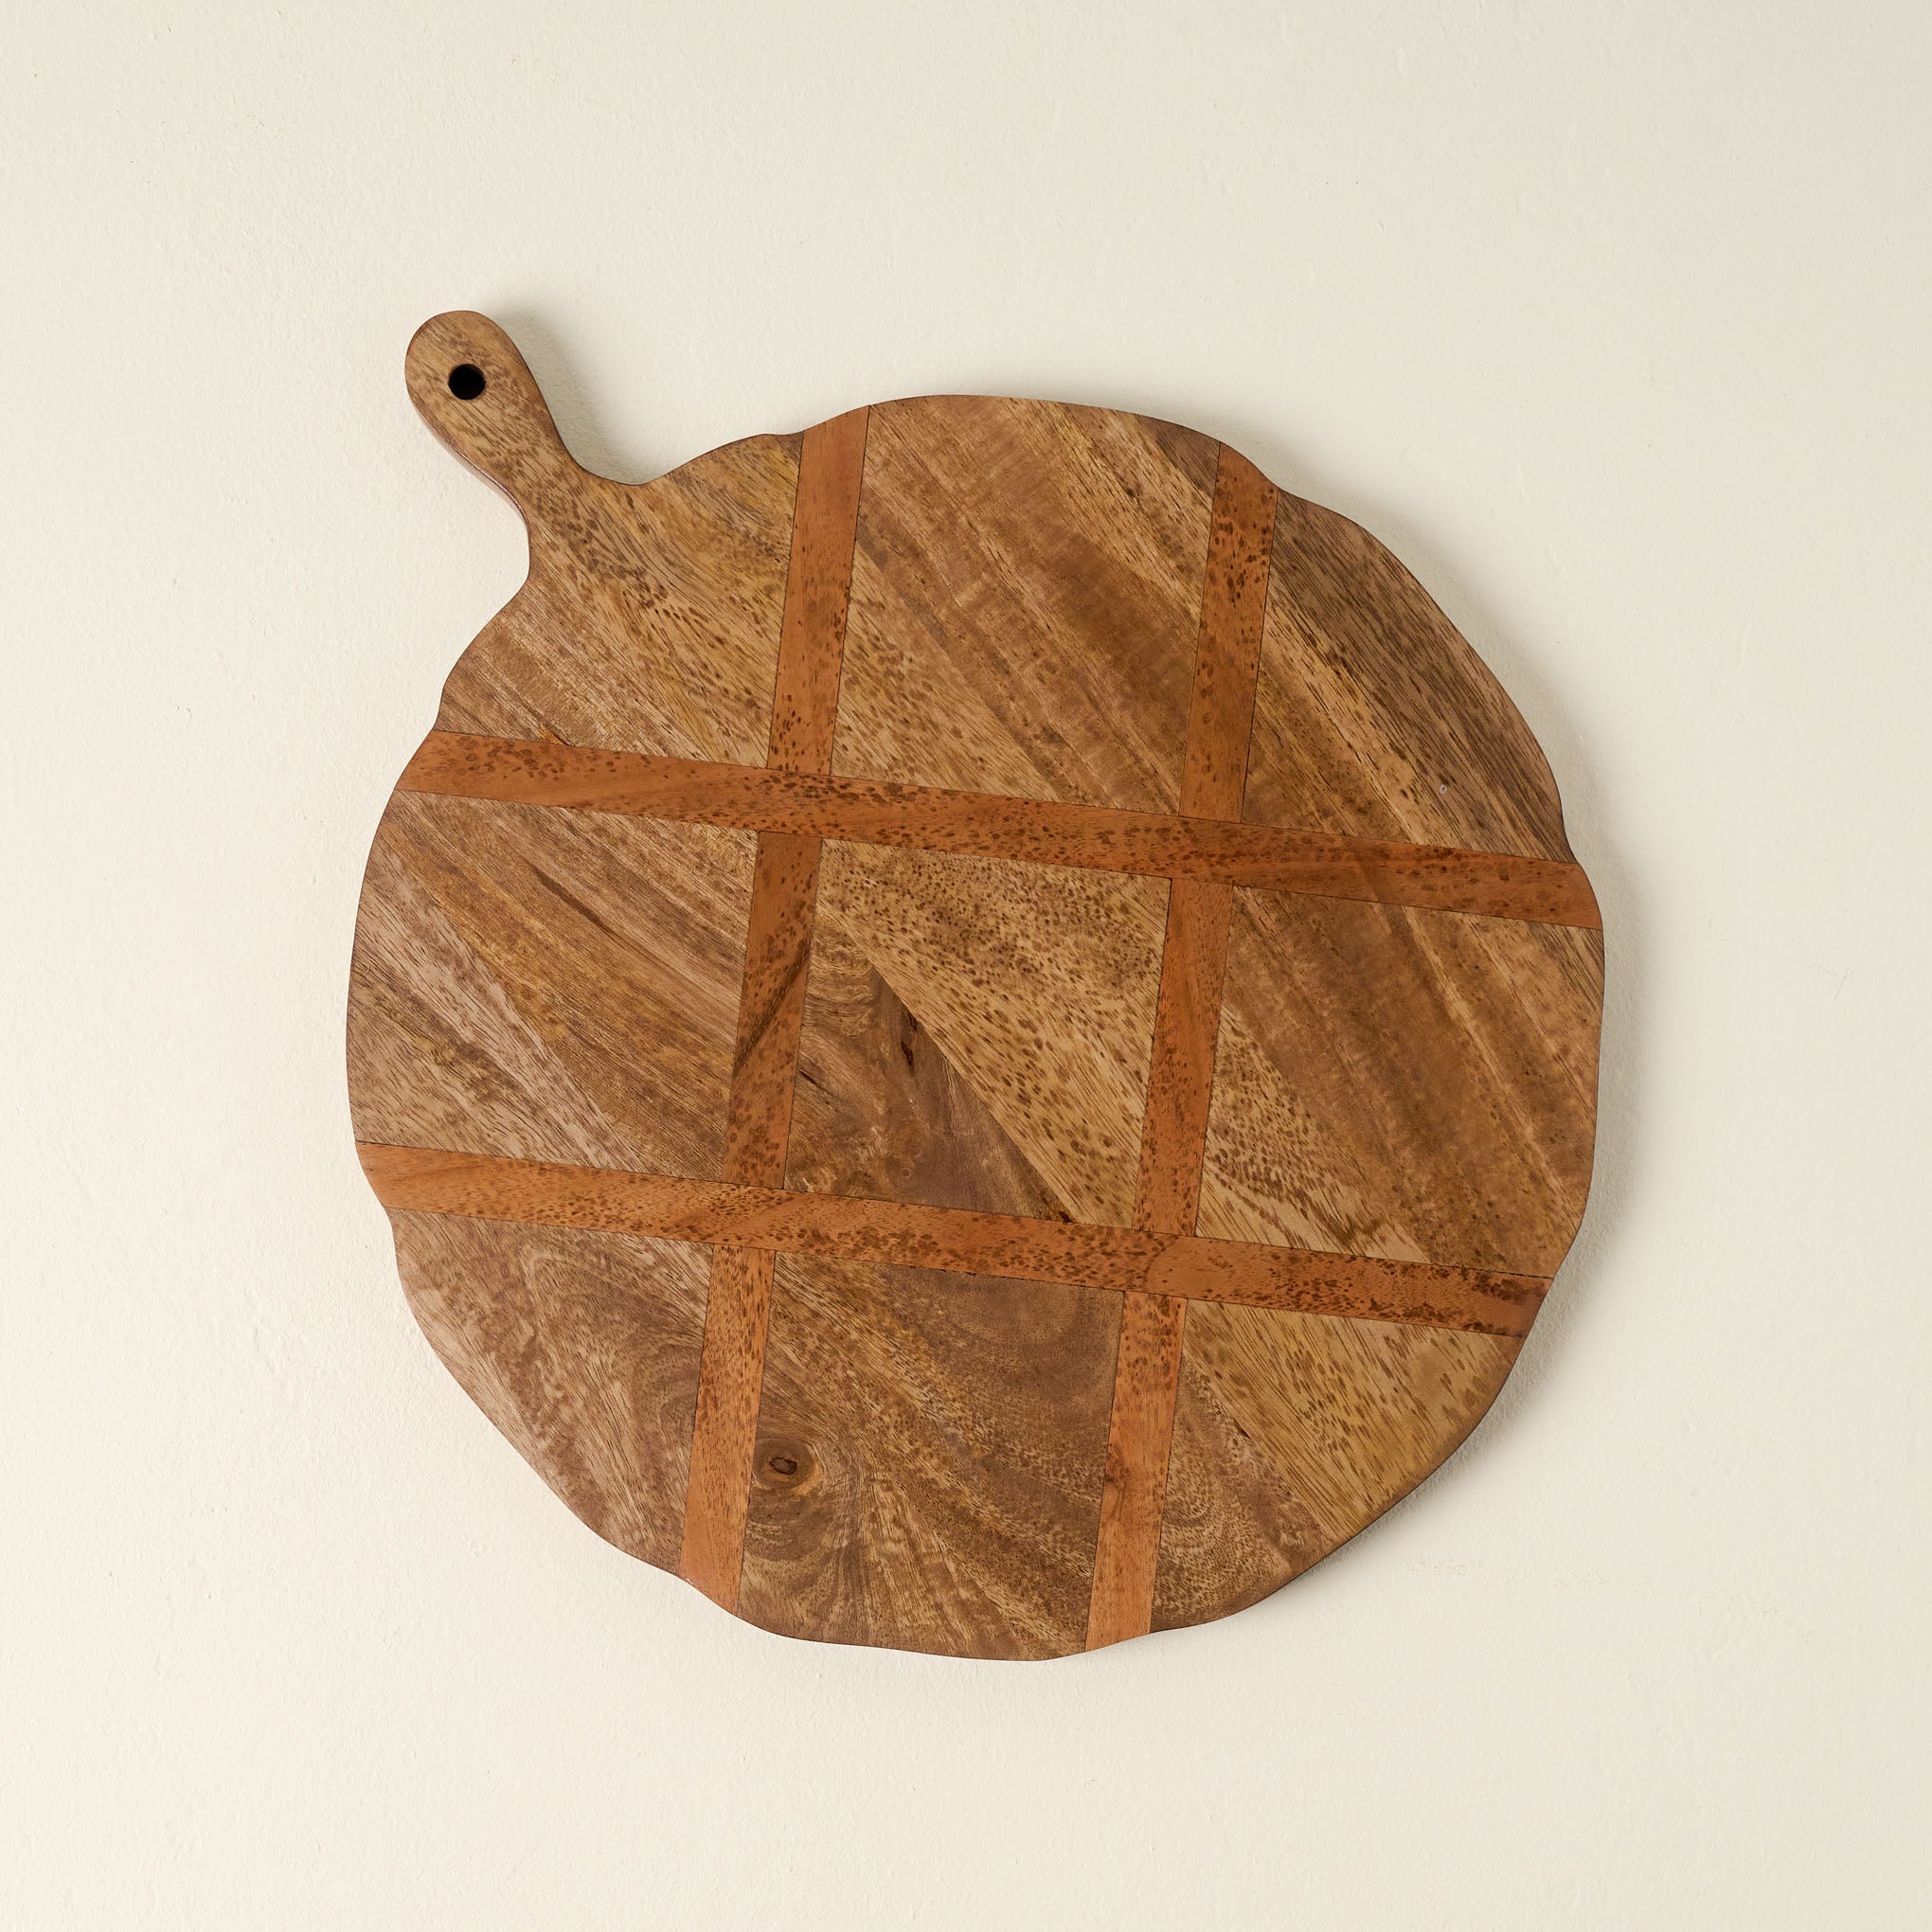 Antiqued Wood Round Serving Board $40.00